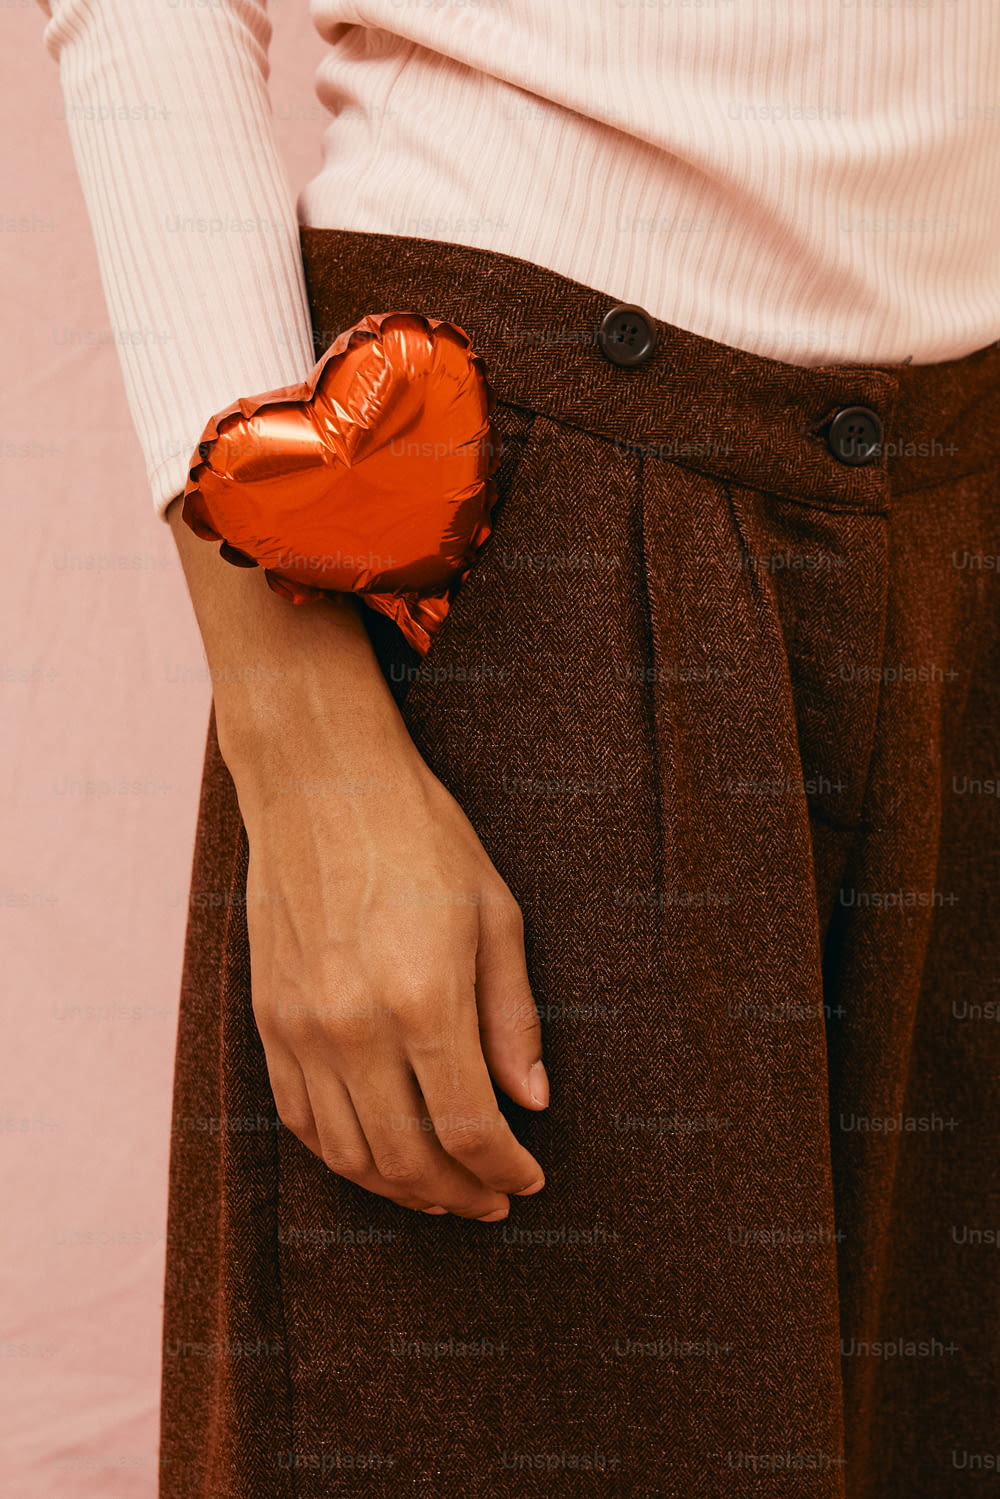 a close up of a person holding a heart shaped object